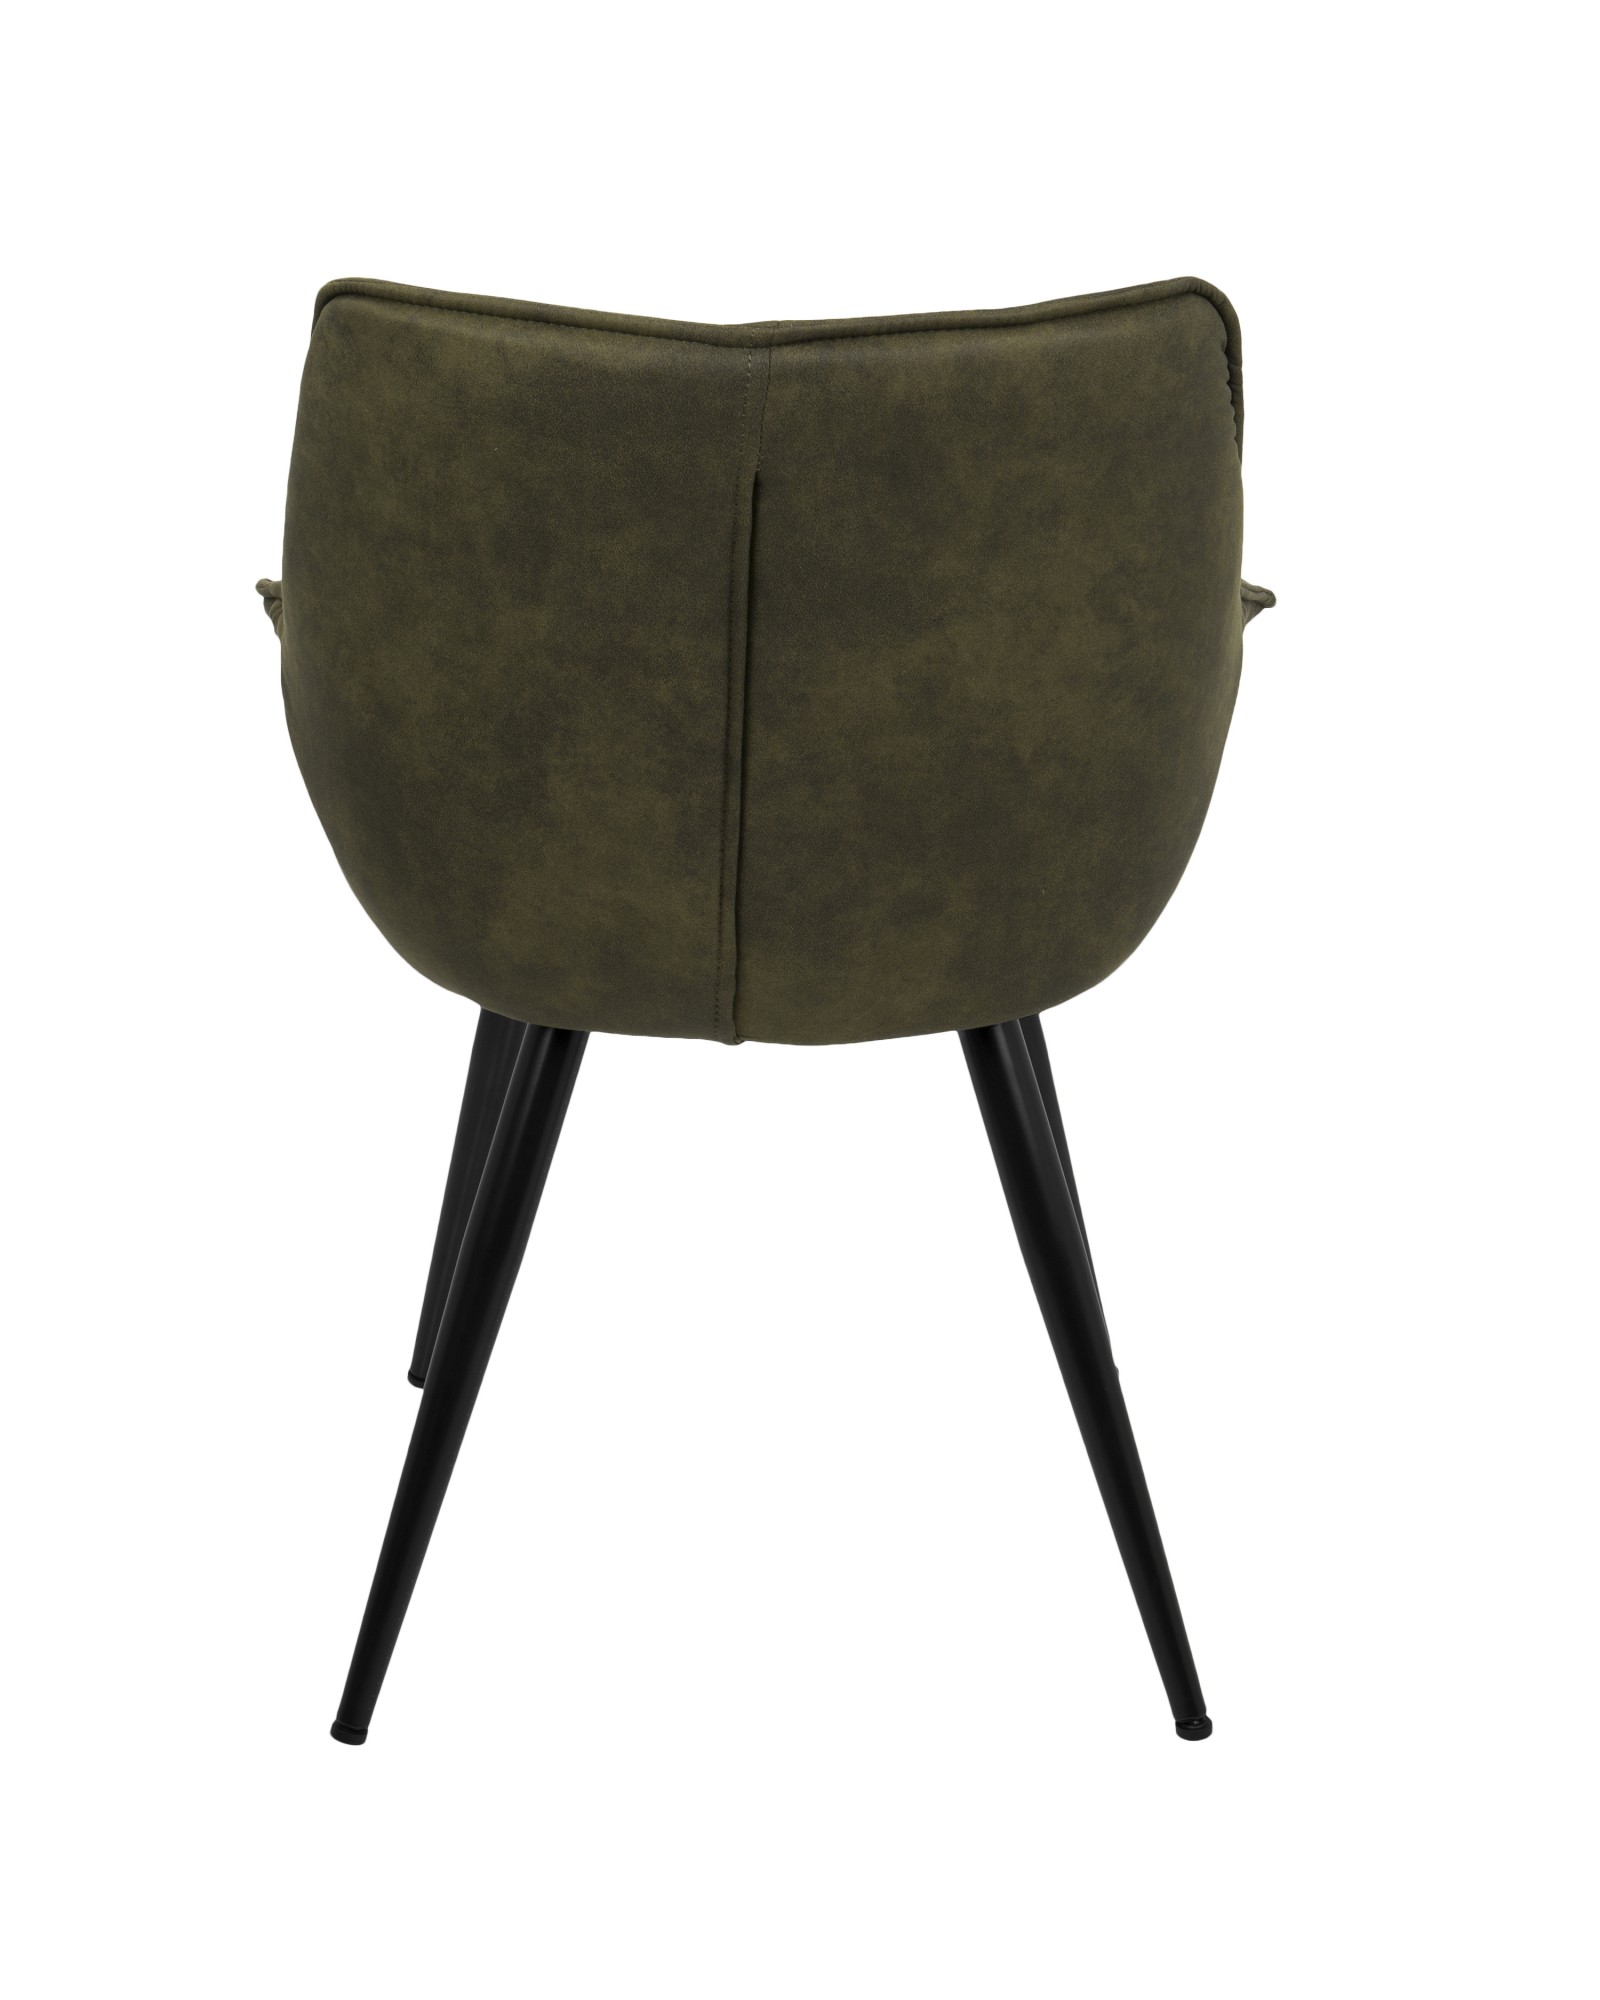 Wrangler Contemporary Accent Chair in Green - Set of 2